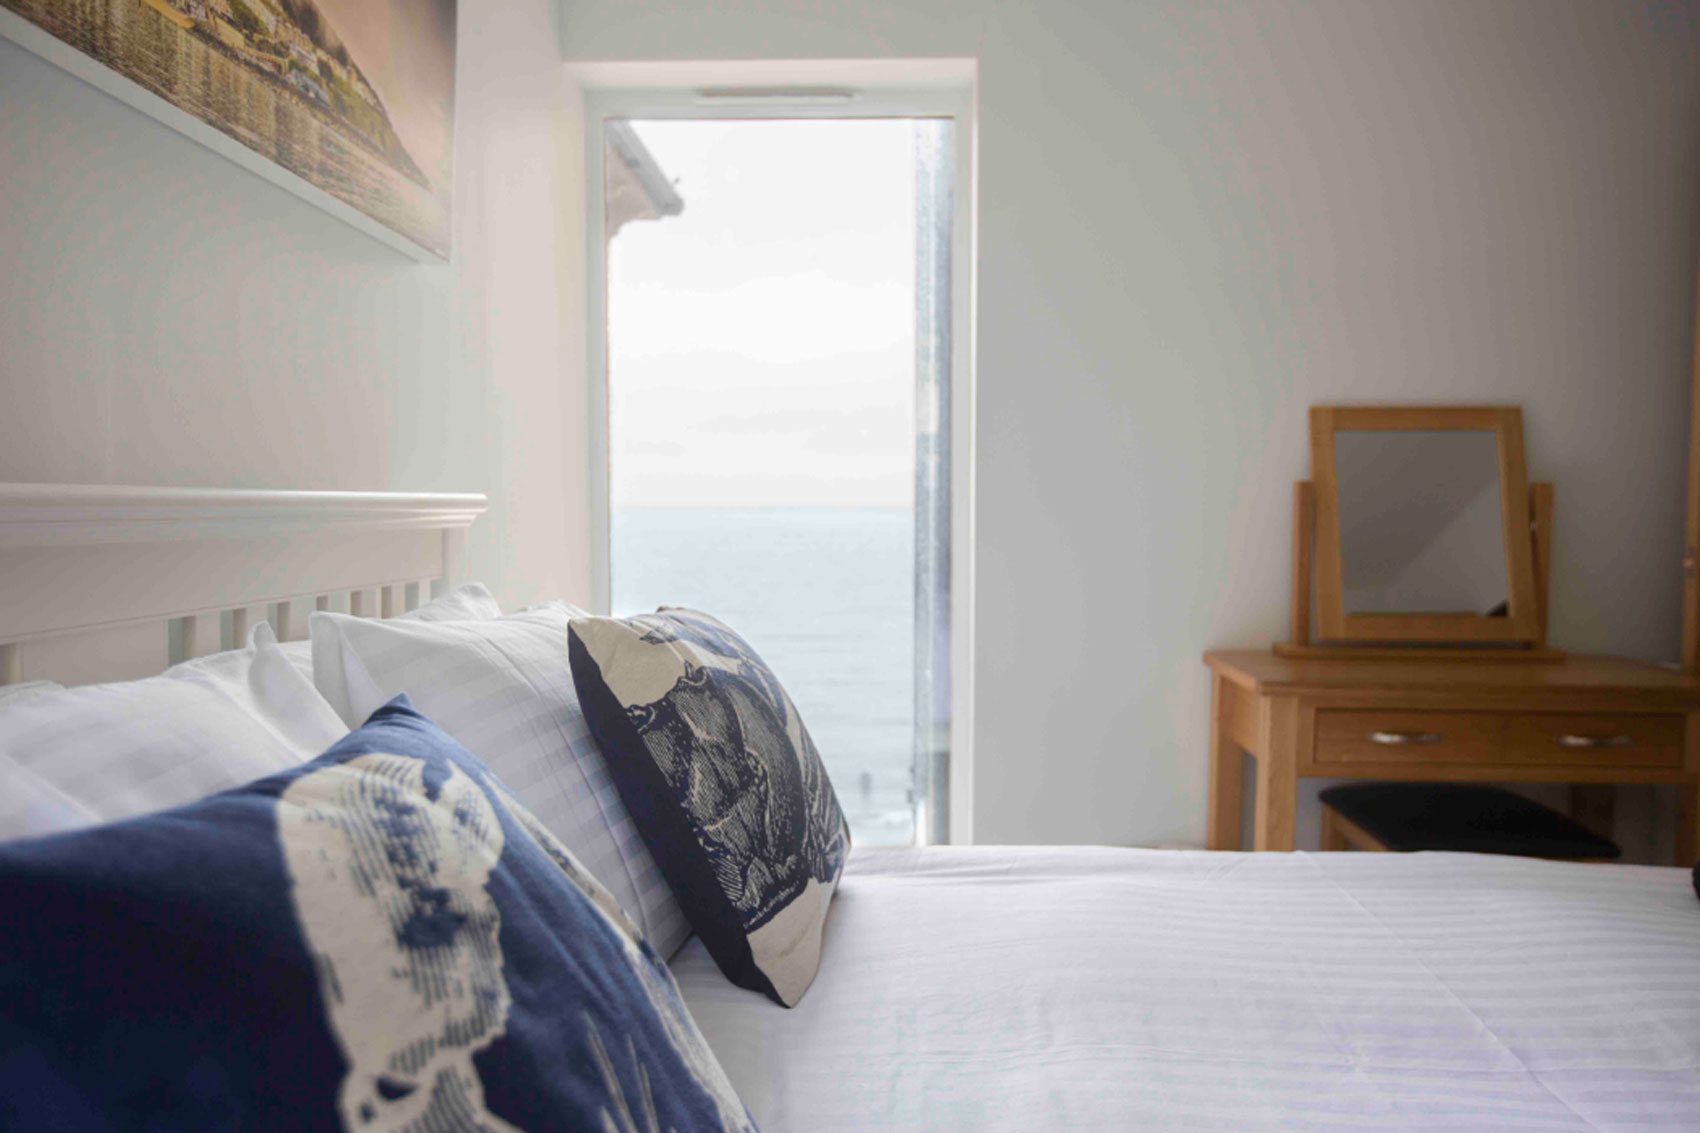 Photo of the master bedroom window on the left side of the room which faces the sea.